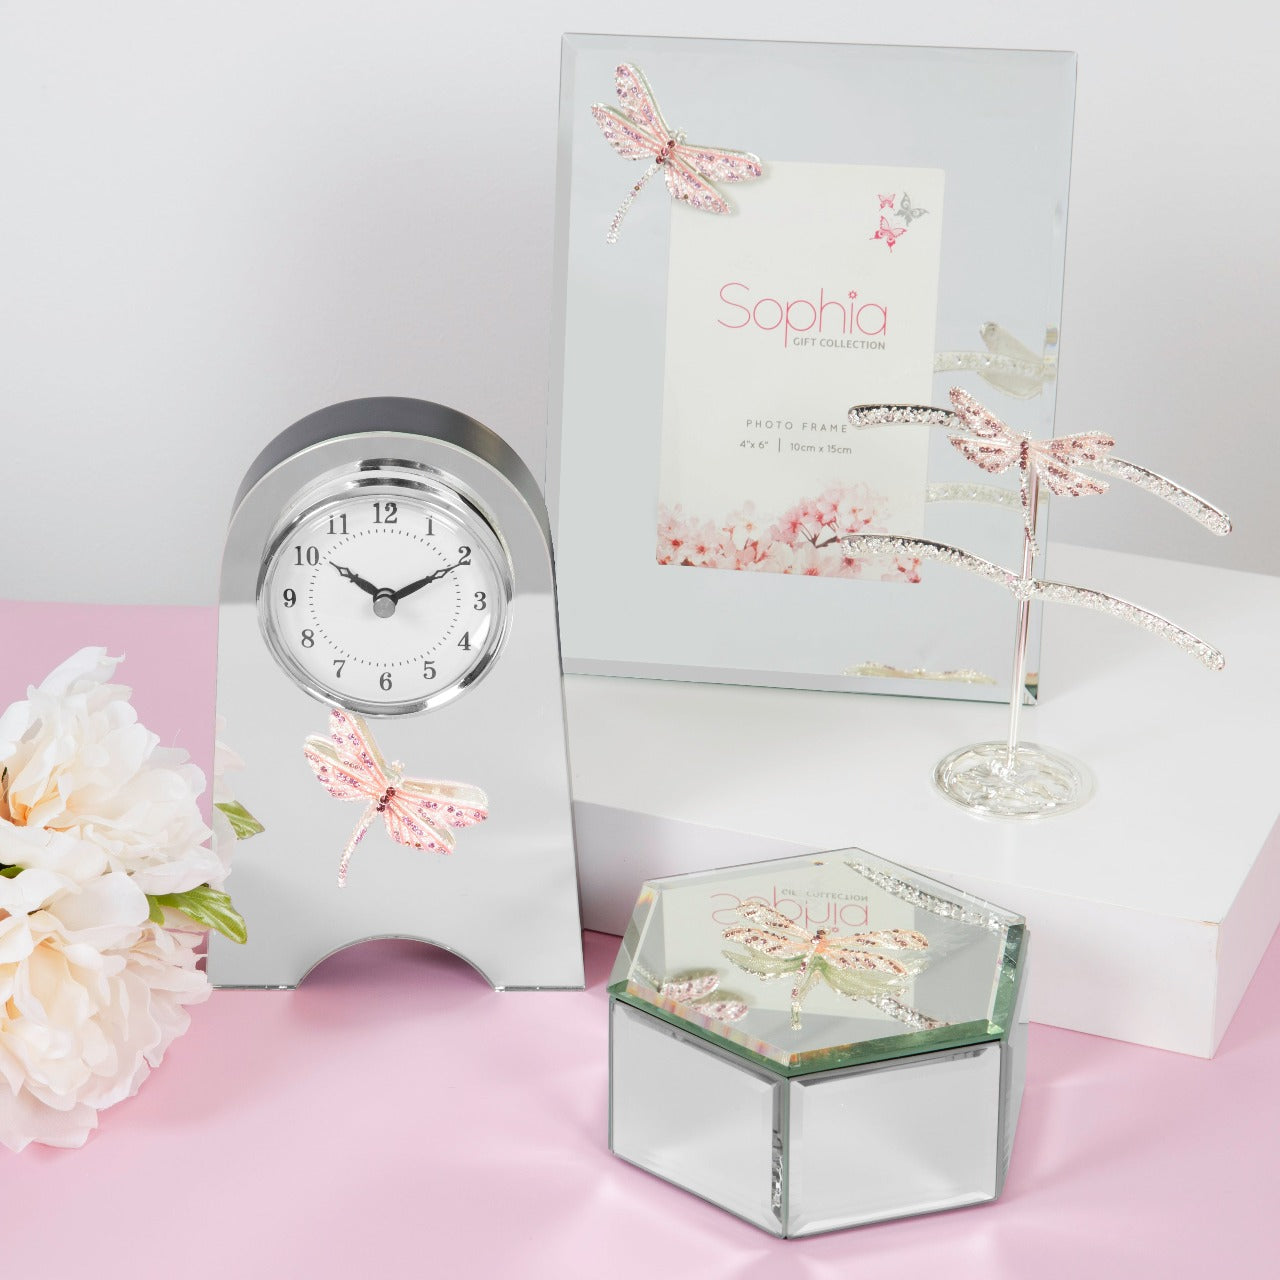 Sophia Pink Crystal Dragonfly Glass Photo Frame 5" x 7"  Give a precious memory a chance to shine with this delicate pink crystal dragonfly 5" x 7" photo frame. From the SOPHIA® Classic Collection - Home of sophistication in women's giftware.